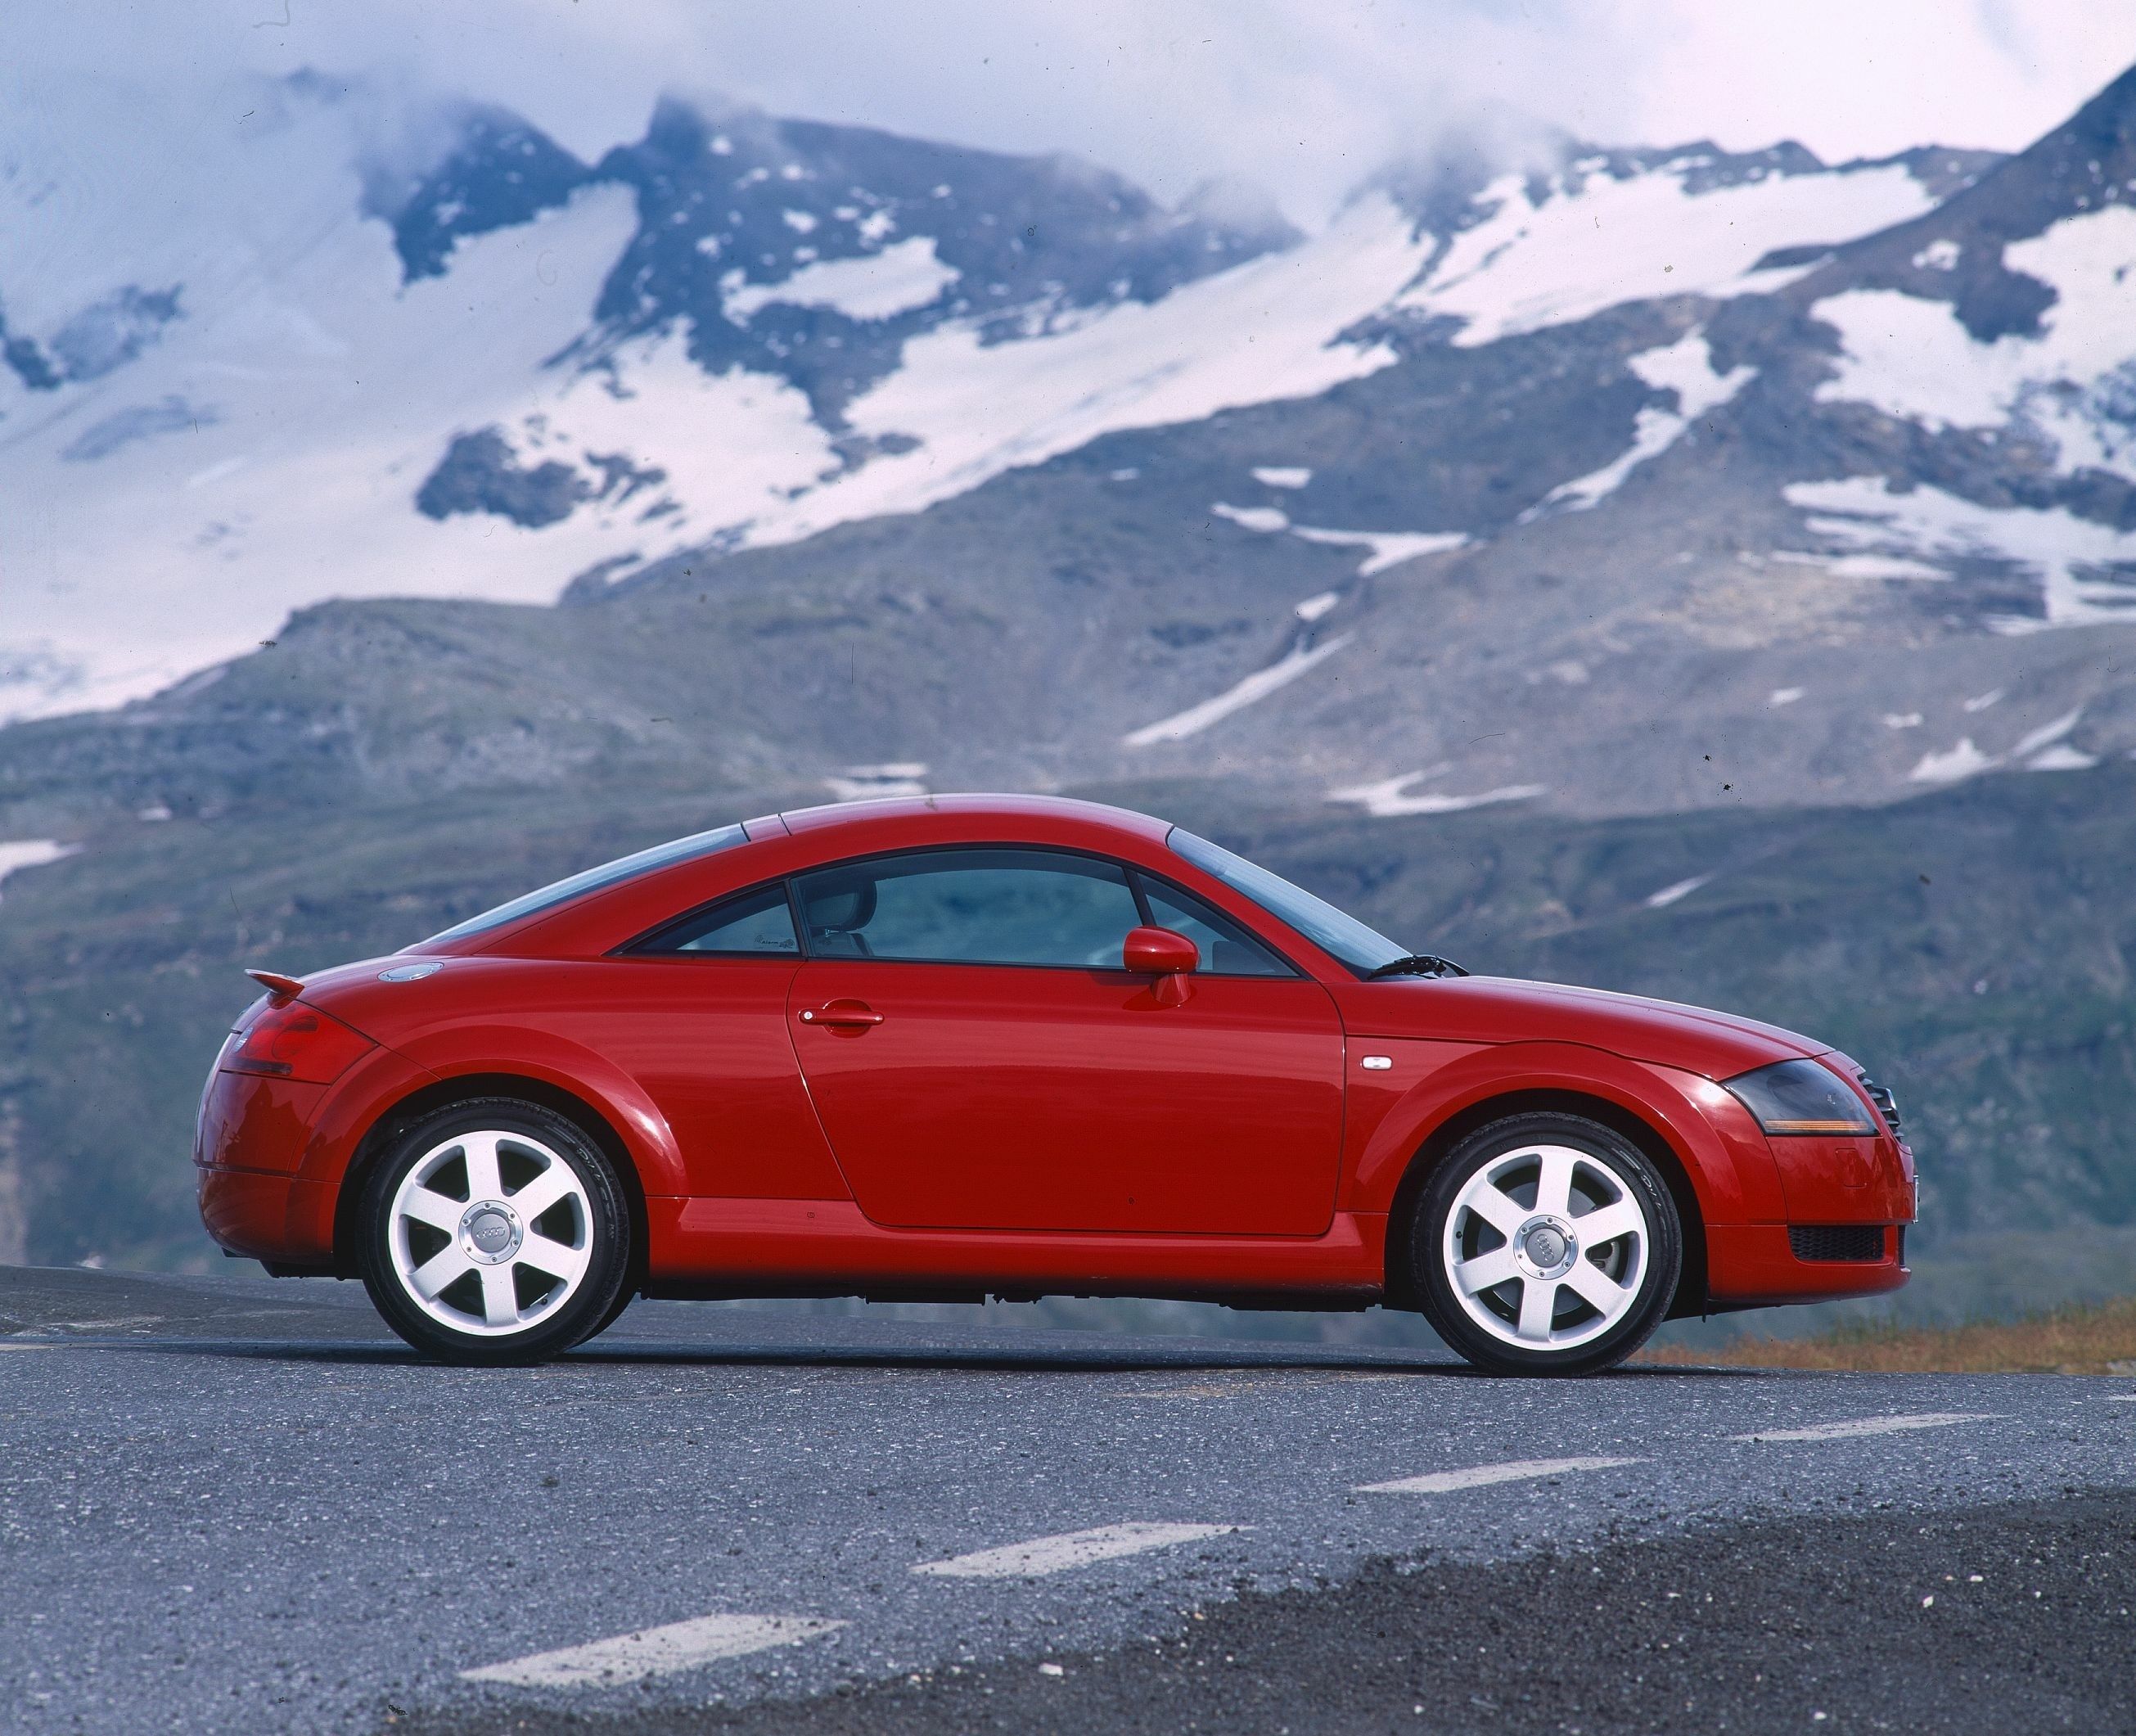 Intervention: The Audi TT Concept Made The Company A Design Leader